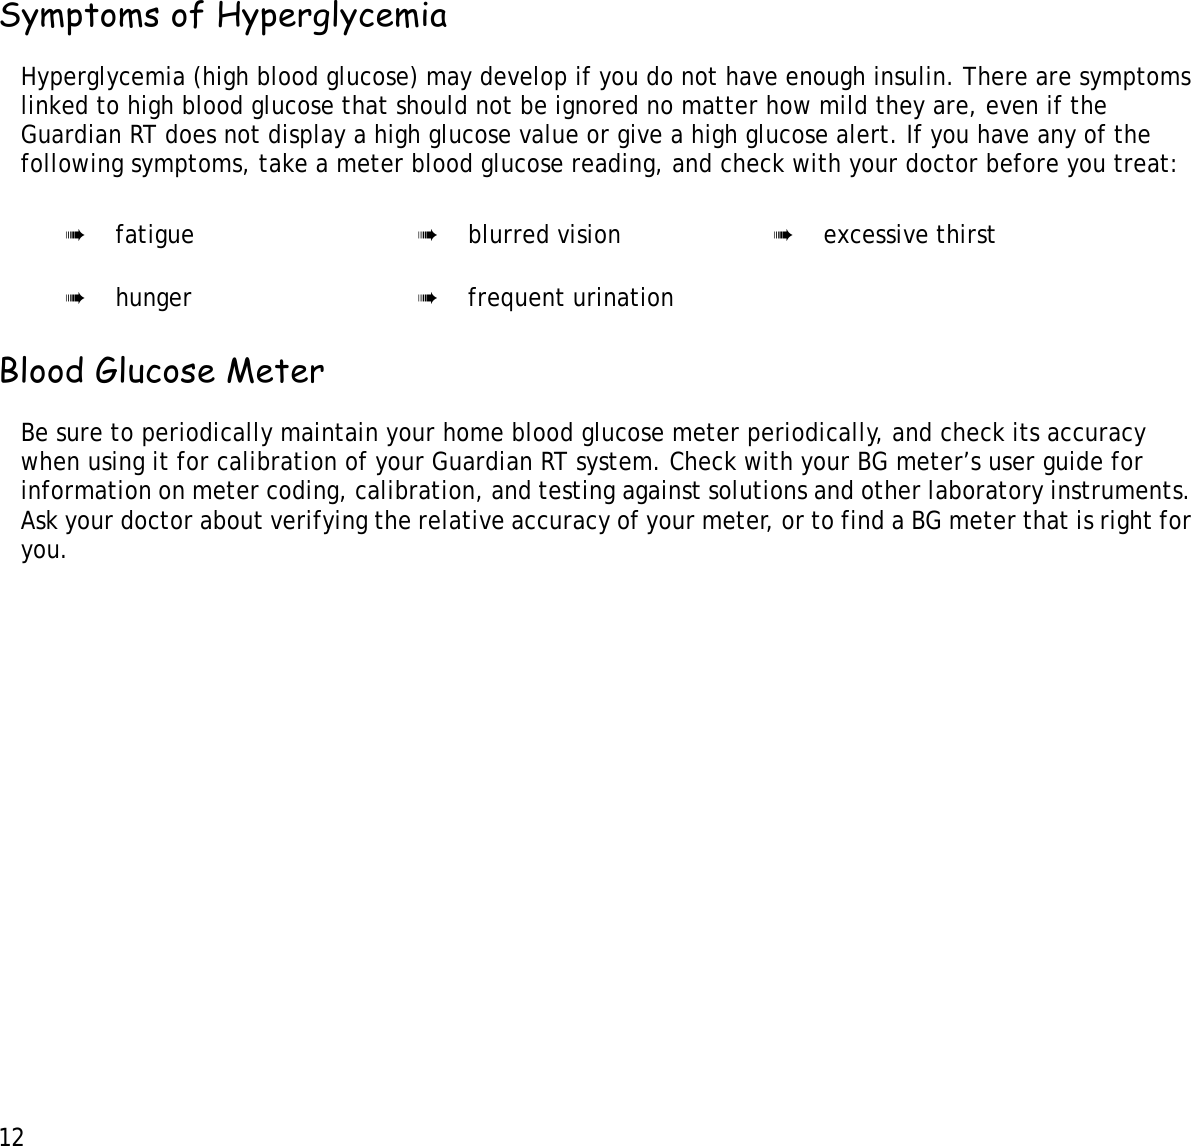 12  Symptoms of HyperglycemiaHyperglycemia (high blood glucose) may develop if you do not have enough insulin. There are symptoms linked to high blood glucose that should not be ignored no matter how mild they are, even if the Guardian RT does not display a high glucose value or give a high glucose alert. If you have any of the following symptoms, take a meter blood glucose reading, and check with your doctor before you treat:Blood Glucose MeterBe sure to periodically maintain your home blood glucose meter periodically, and check its accuracy when using it for calibration of your Guardian RT system. Check with your BG meter’s user guide for information on meter coding, calibration, and testing against solutions and other laboratory instruments. Ask your doctor about verifying the relative accuracy of your meter, or to find a BG meter that is right for you.➠fatigue ➠blurred vision ➠excessive thirst➠hunger ➠frequent urination